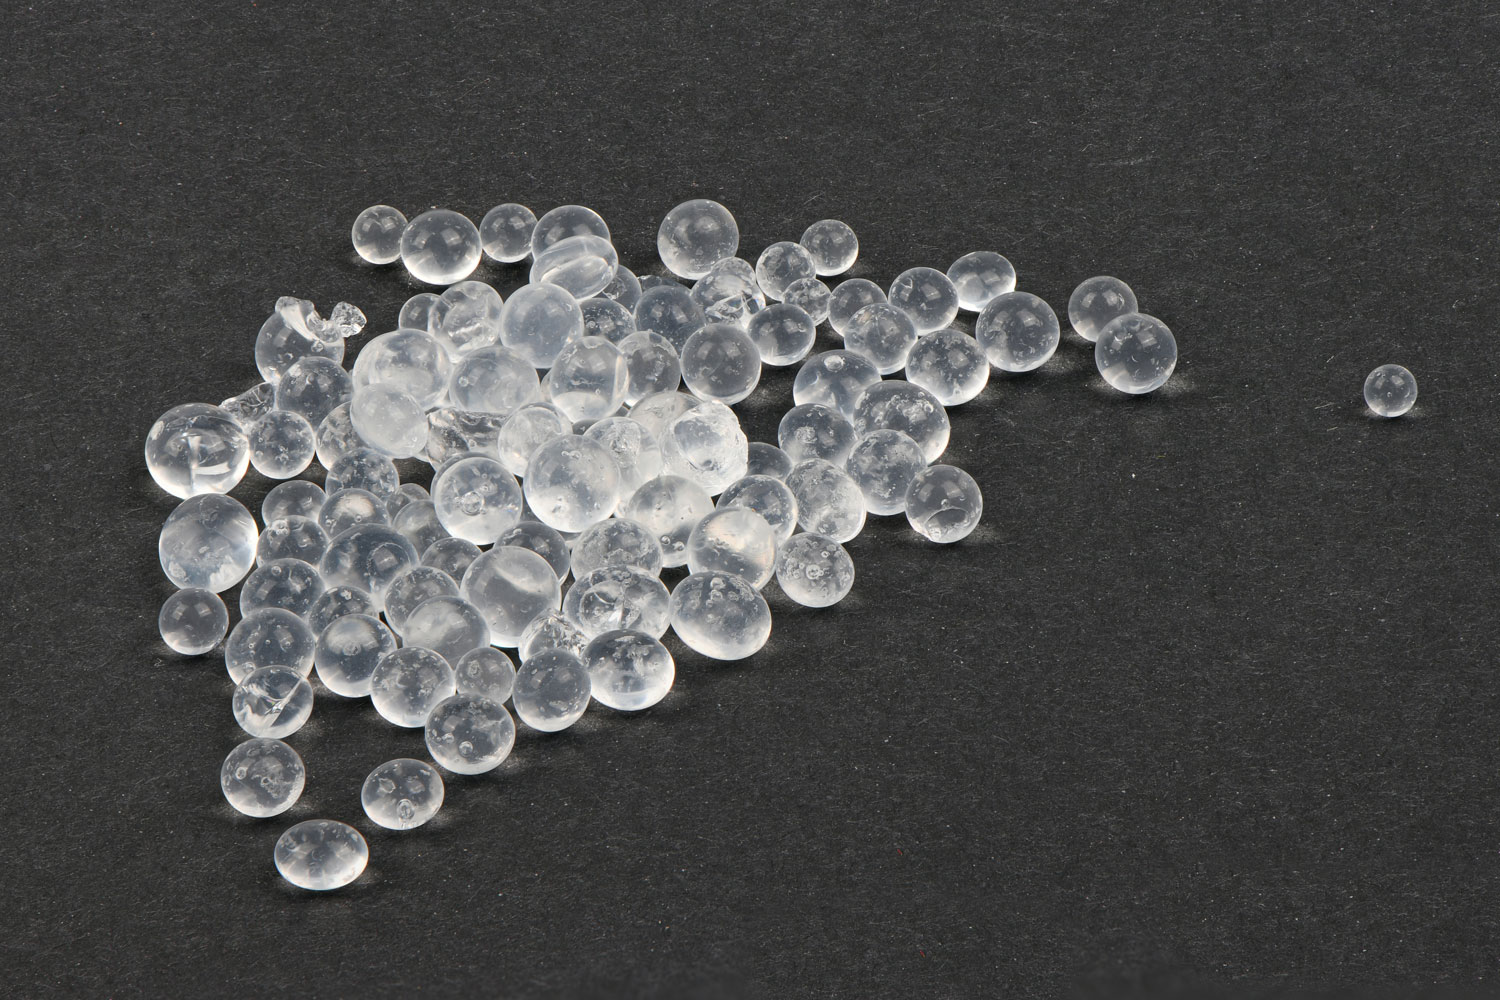 A small pile of Silica gel